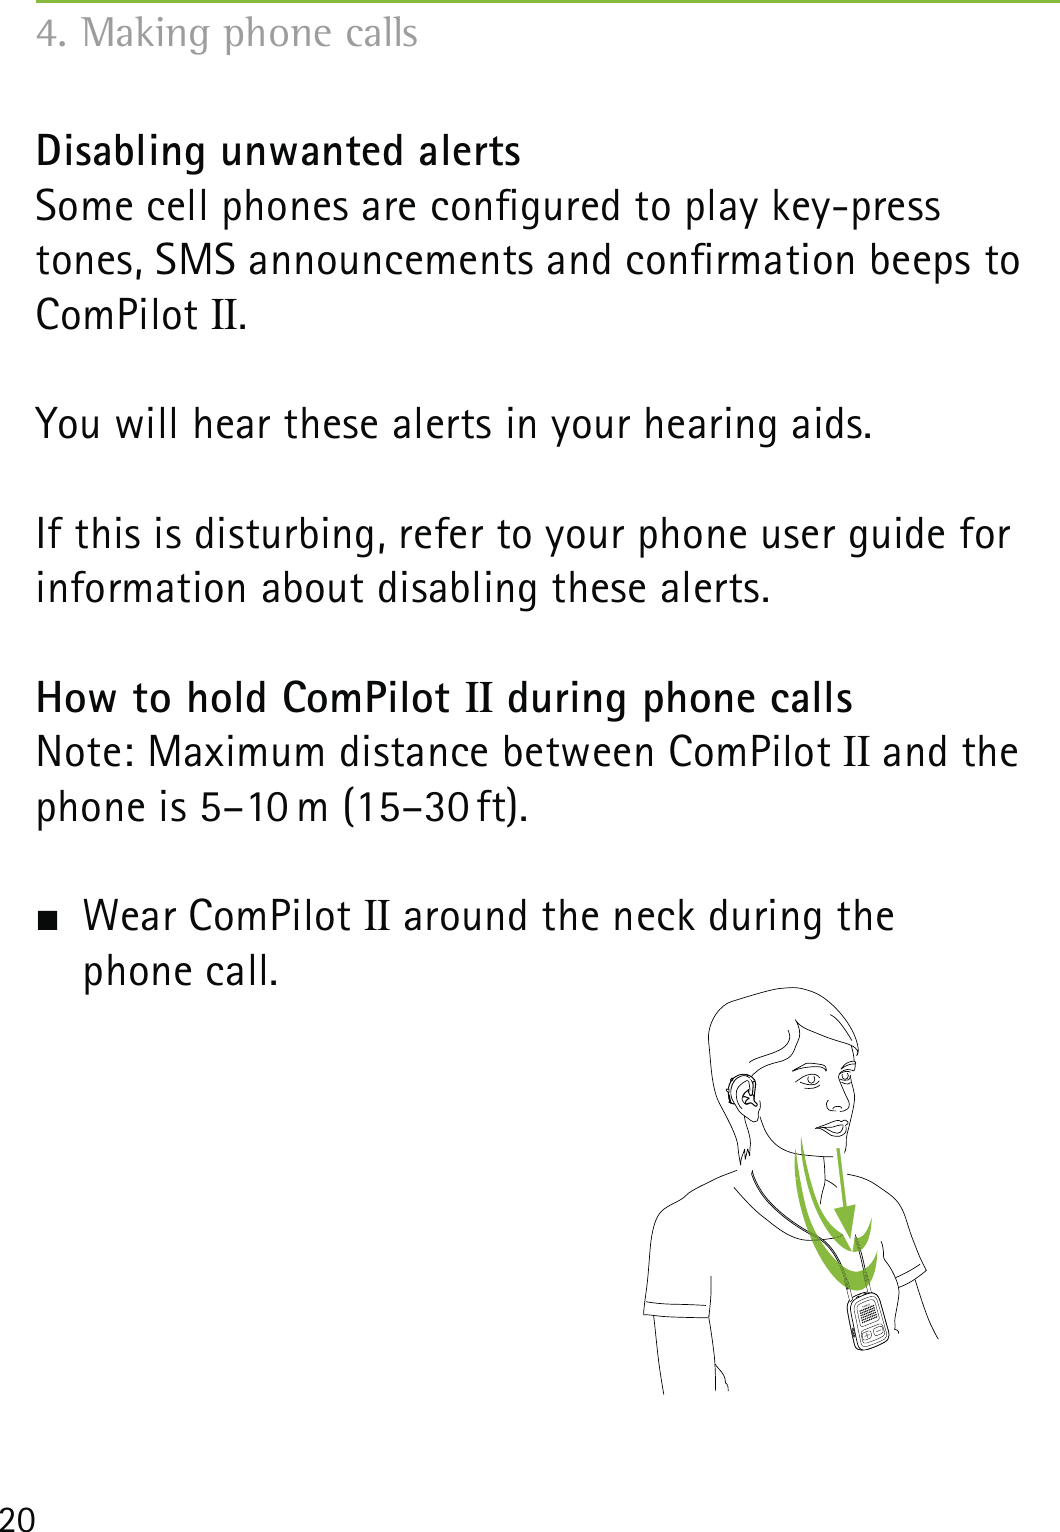 20Disabling unwanted alertsSome cell phones are congured to play key-press tones, SMS announcements and conrmation beeps to ComPilot II.You will hear these alerts in your hearing aids.If this is disturbing, refer to your phone user guide for information about disabling these alerts.How to hold ComPilot II during phone callsNote: Maximum distance between ComPilot II and the phone is 5–10 m (15–30 ft).  Wear ComPilot II around the neck during the  phone call.4. Making phone calls